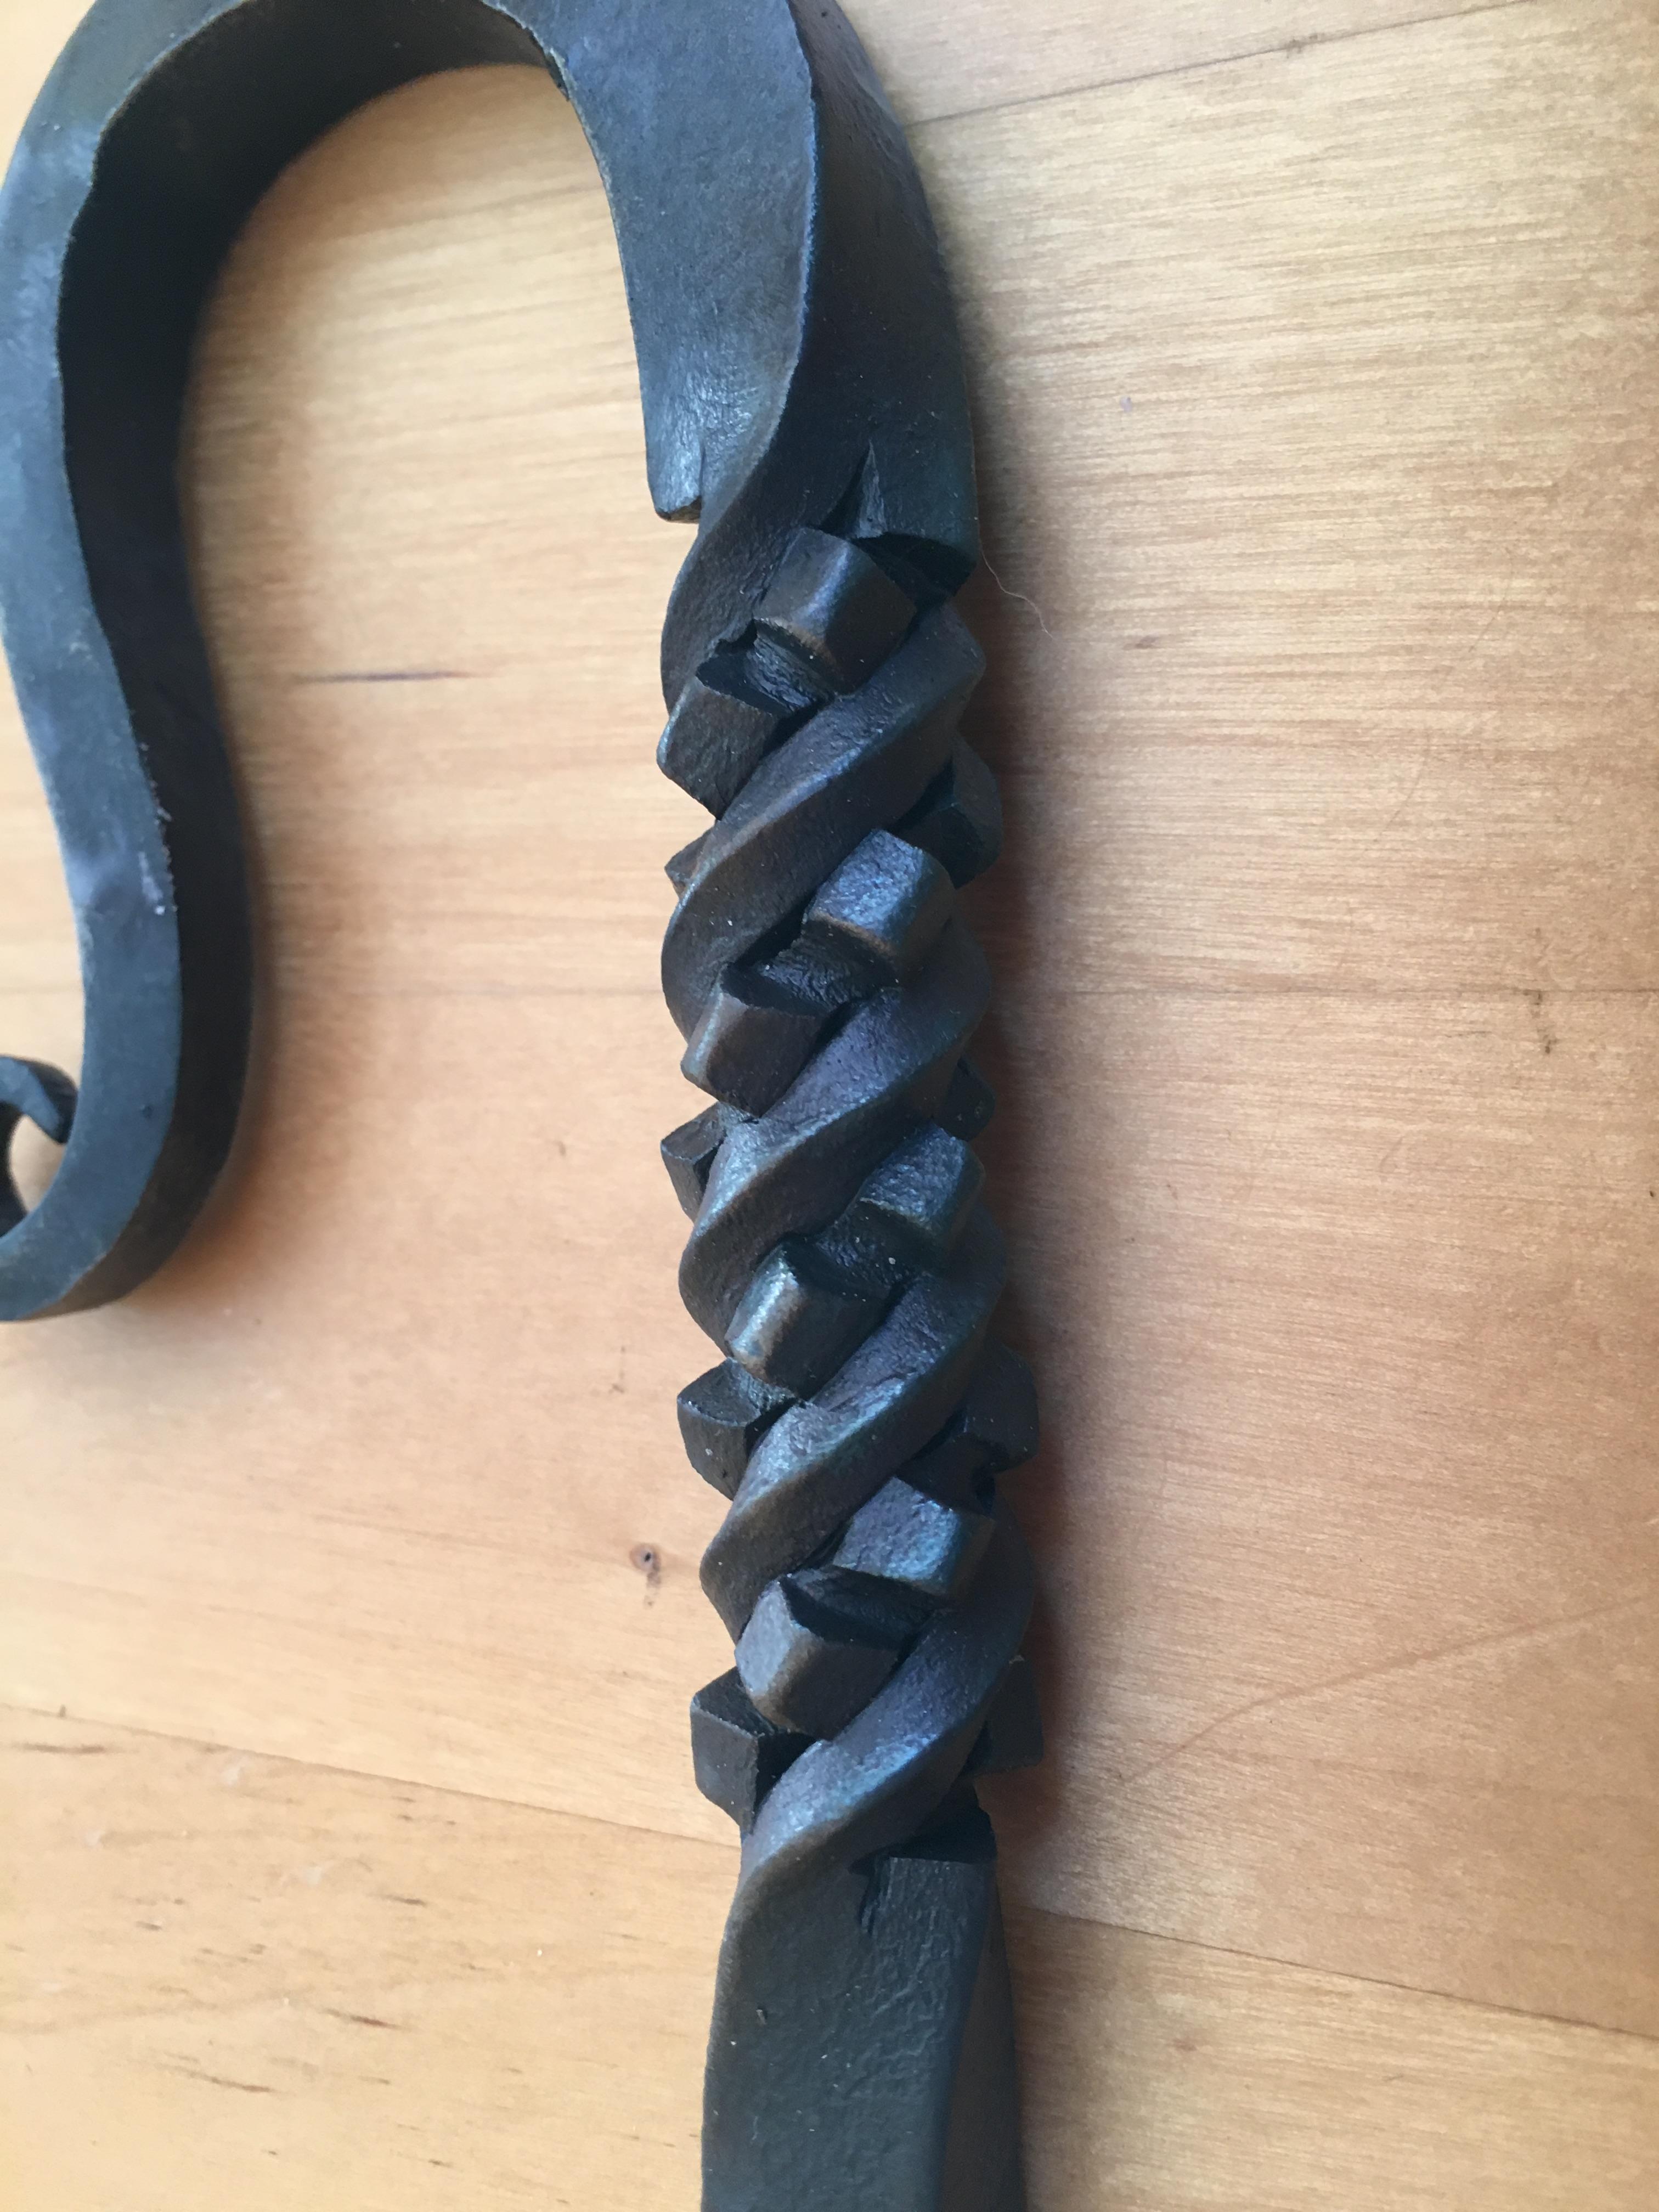 Show me your Bottle Openers! - Page 62 - Blacksmithing, General ...